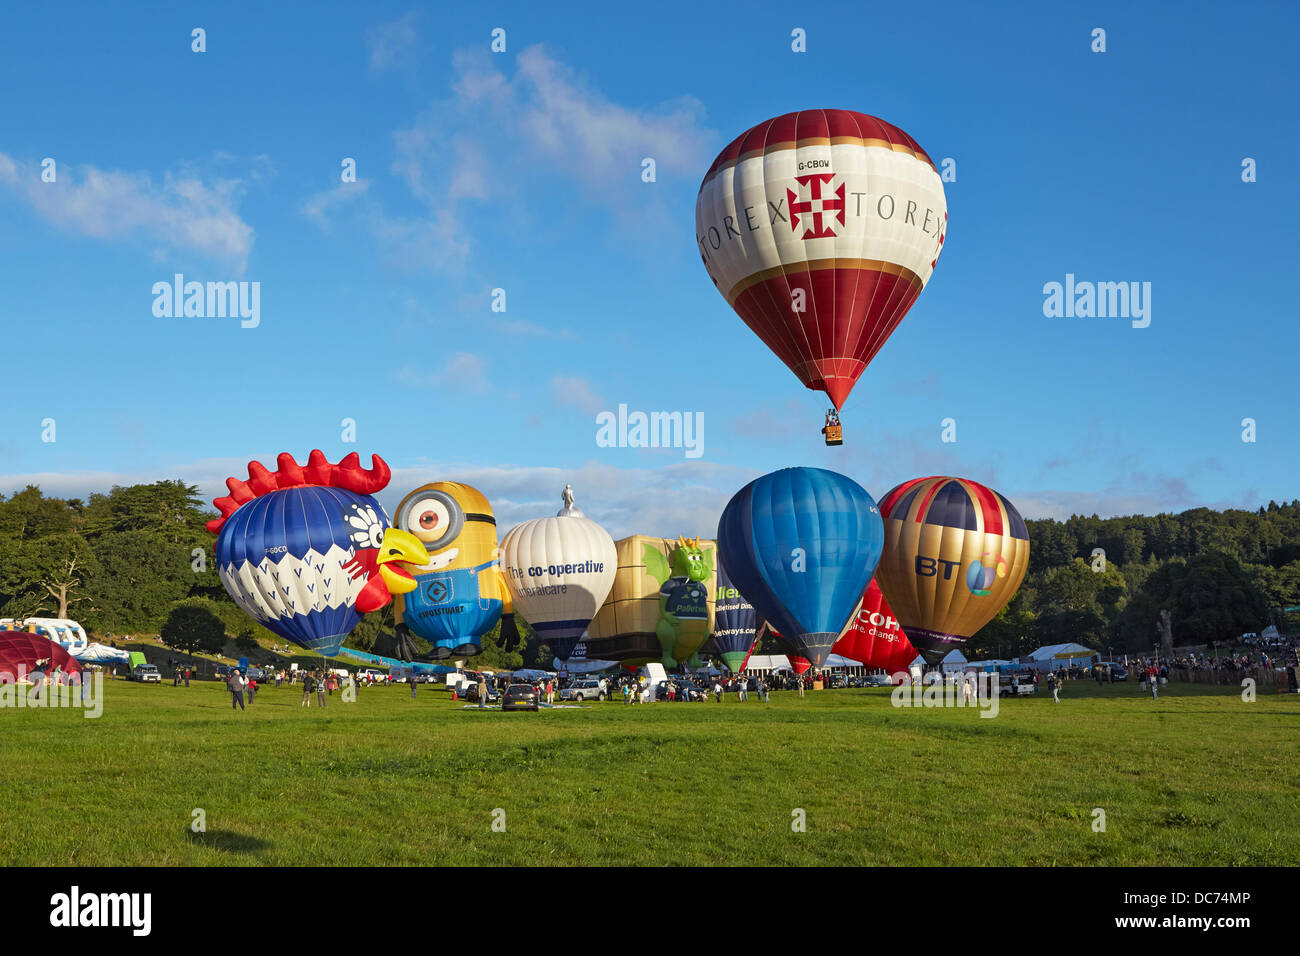 Bristol, UK. 9th Aug, 2013. Balloons at the 35th UK Bristol balloon fiesta at the Ashton court estate Morning launch launch on the 9th August 2013 including the BT FT Ricoh Palletways an Despicable Me Stuart minion balloons with a balloon taking off Credit:  David Lyon/Alamy Live News Stock Photo